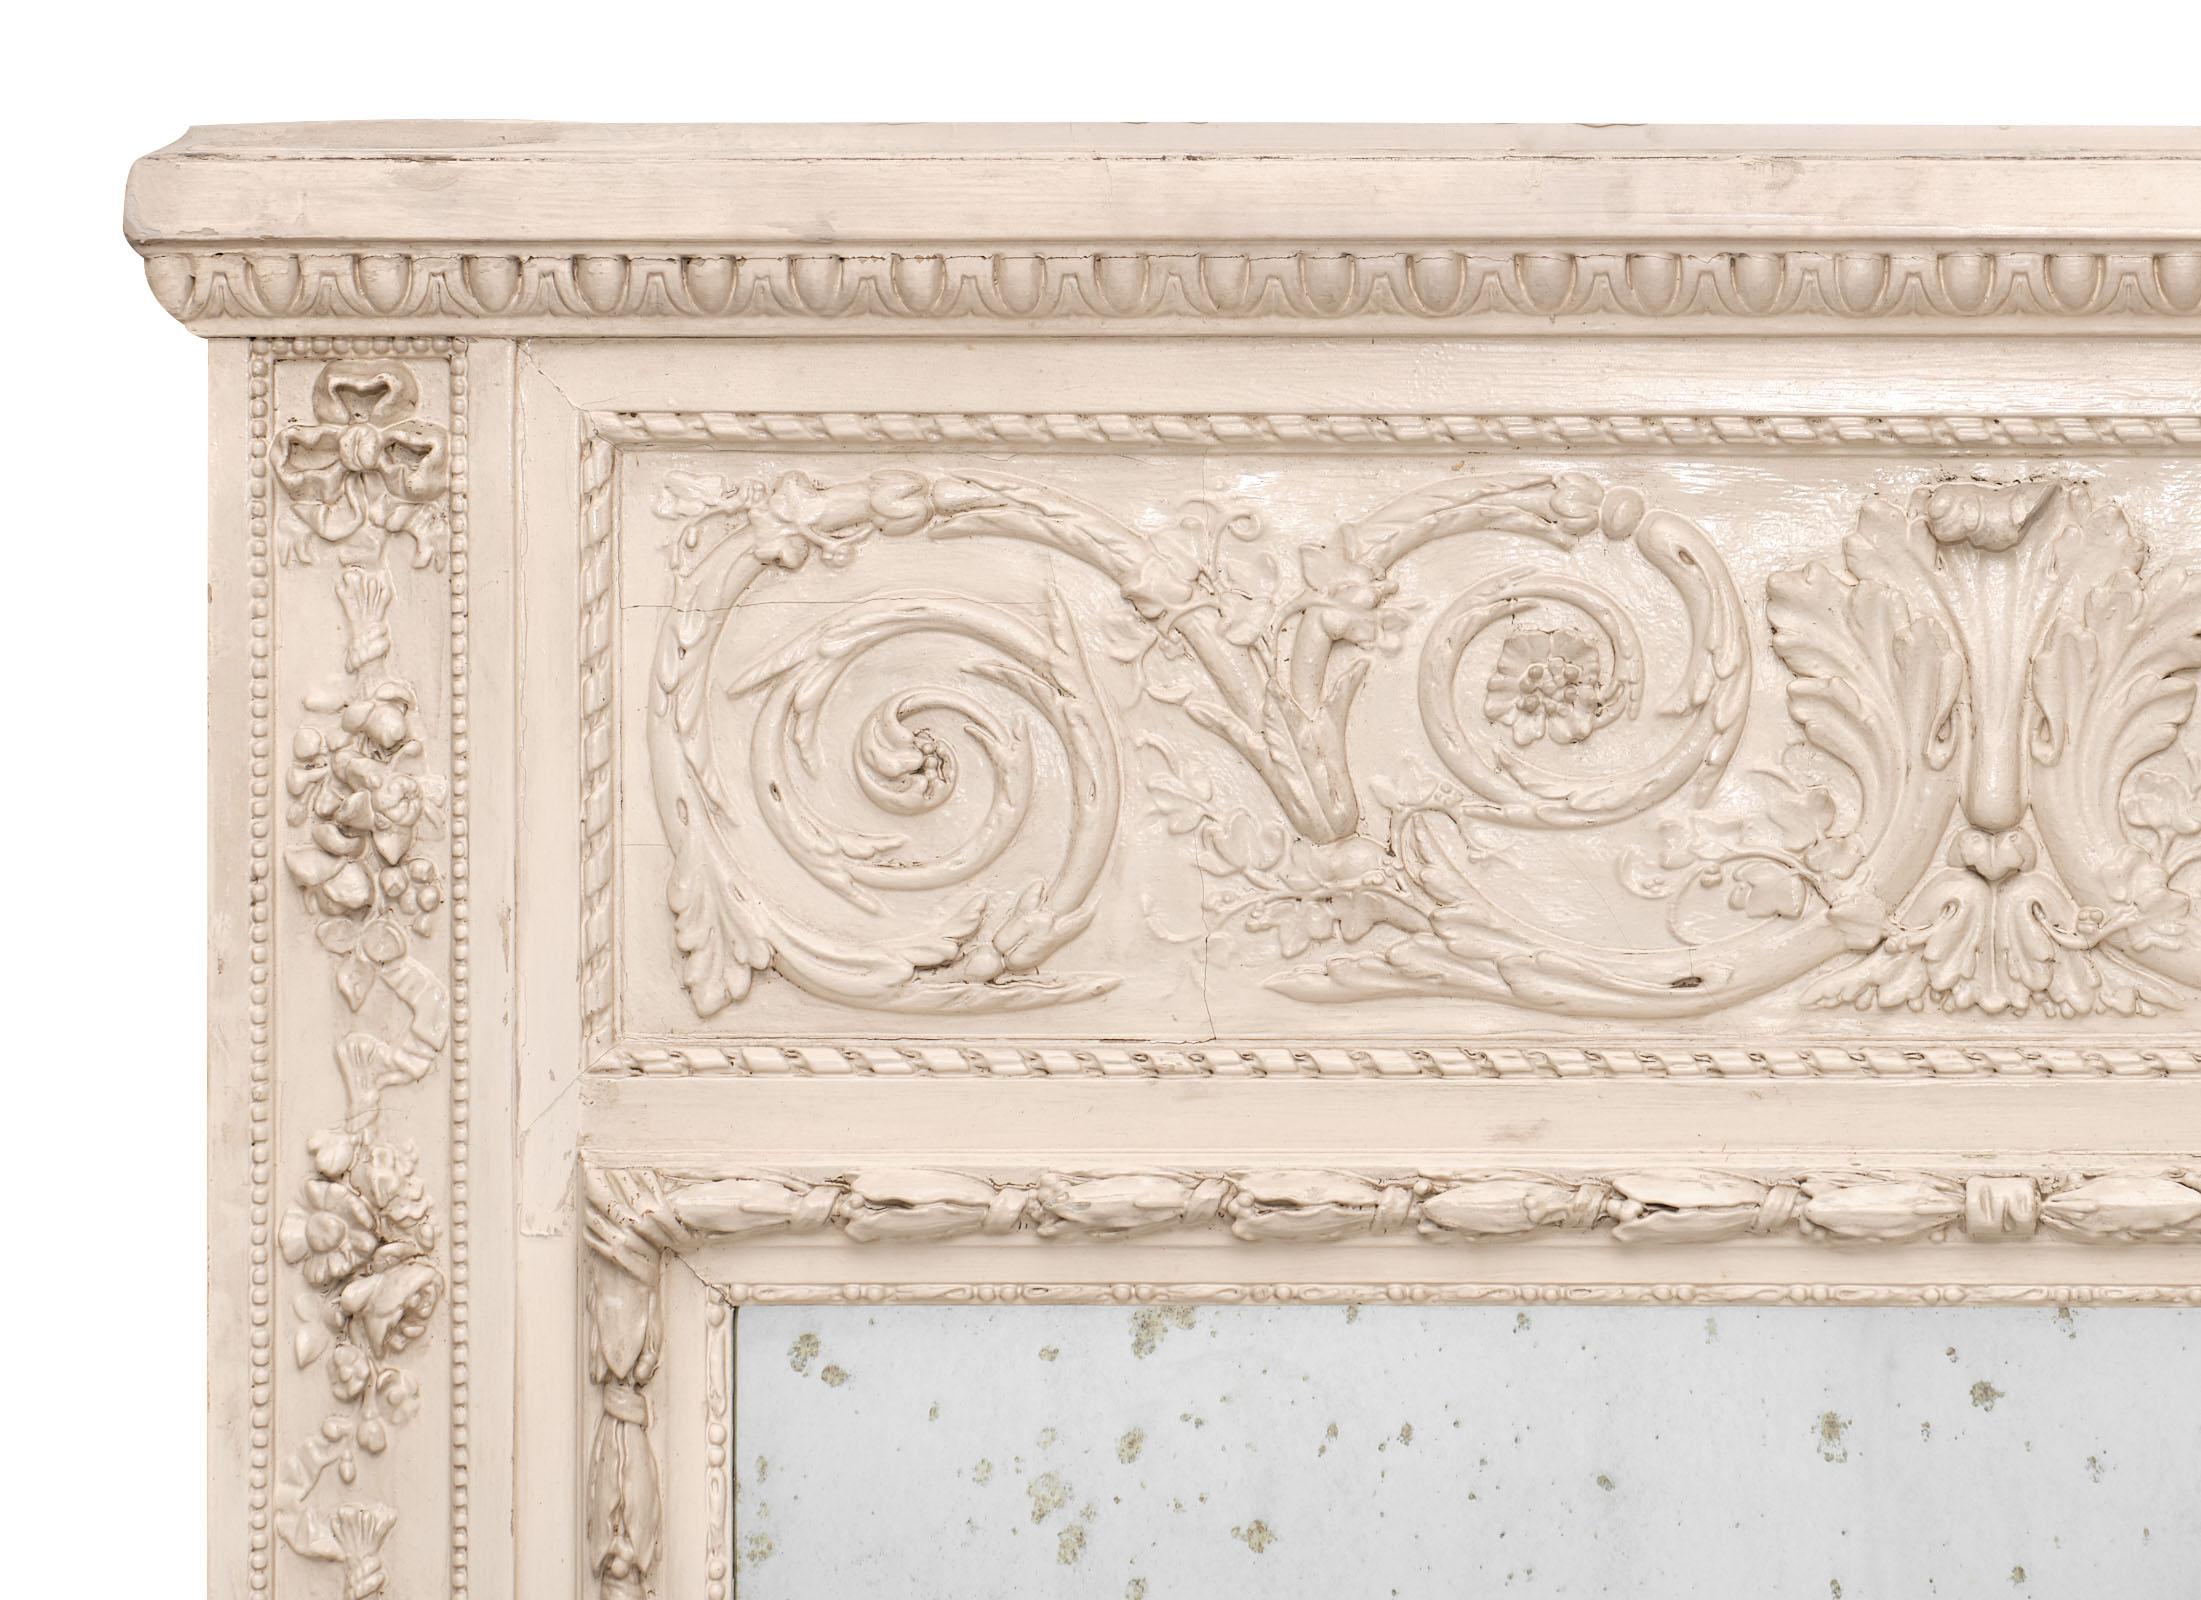 A French antique trumeau with hand carved details and a painted and patinated finish. This piece features the original Mercury mirror, beautifully aged. We loved the large size, the floral details and scrolls on the fronton.